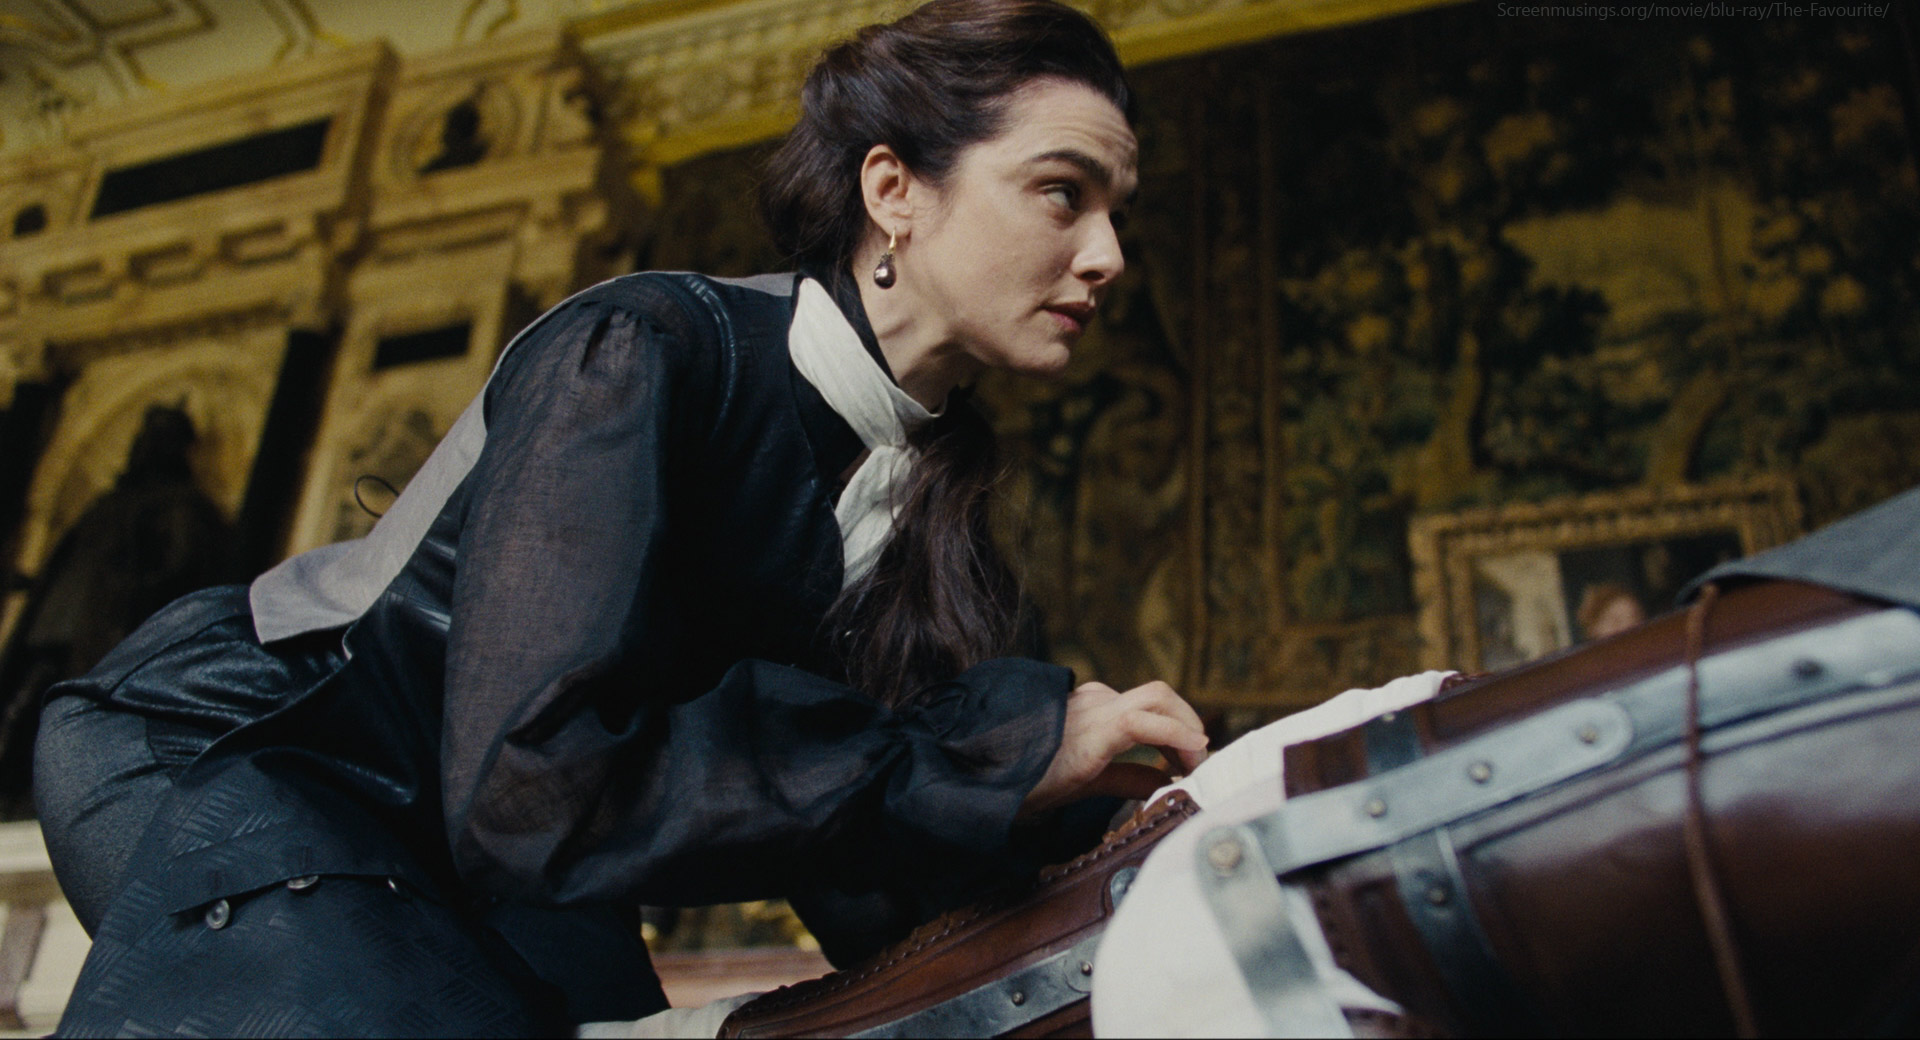 https://screenmusings.org/movie/blu-ray/The-Favourite/images/The-Favourite-160.jpg